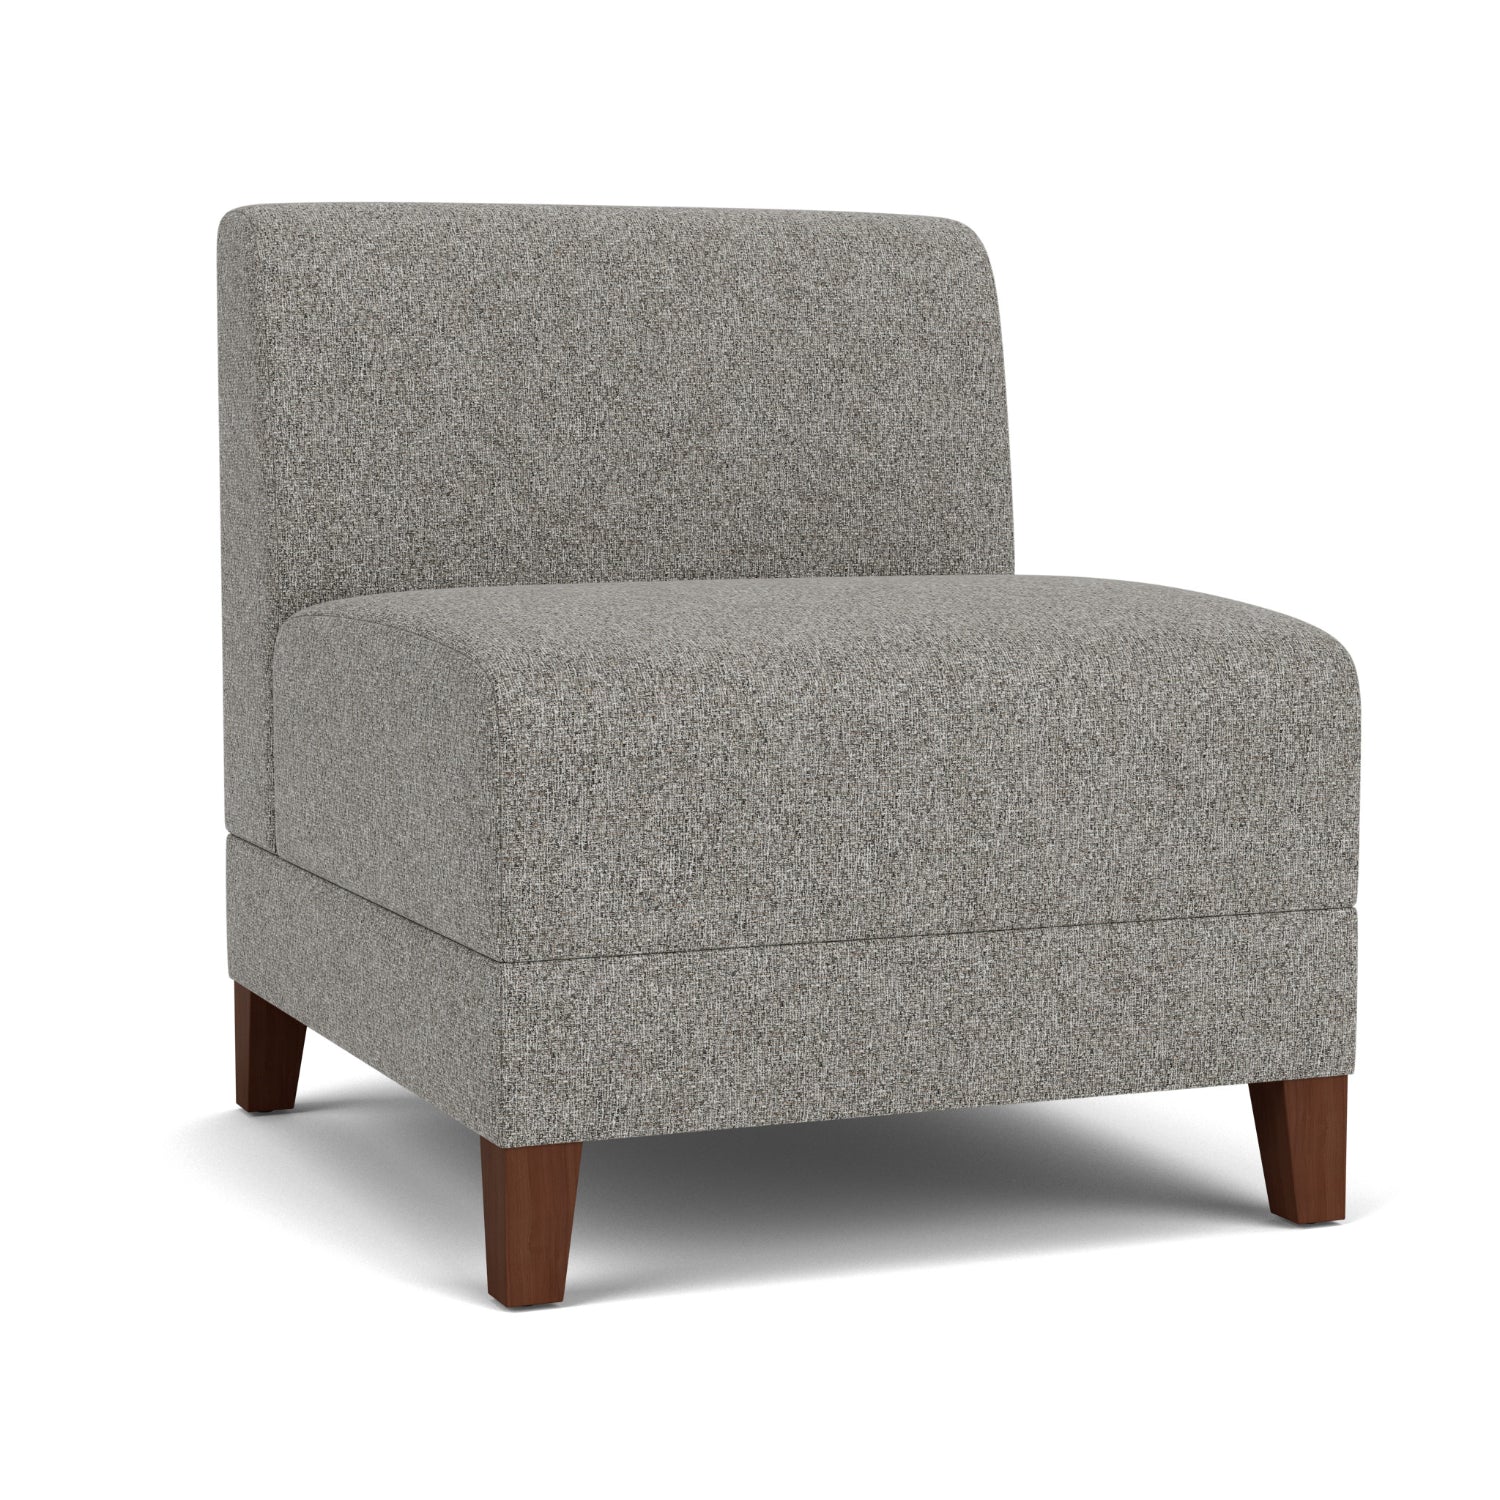 Fremont Collection Reception Seating, Armless Guest Chair, Standard Fabric Upholstery, FREE SHIPPING